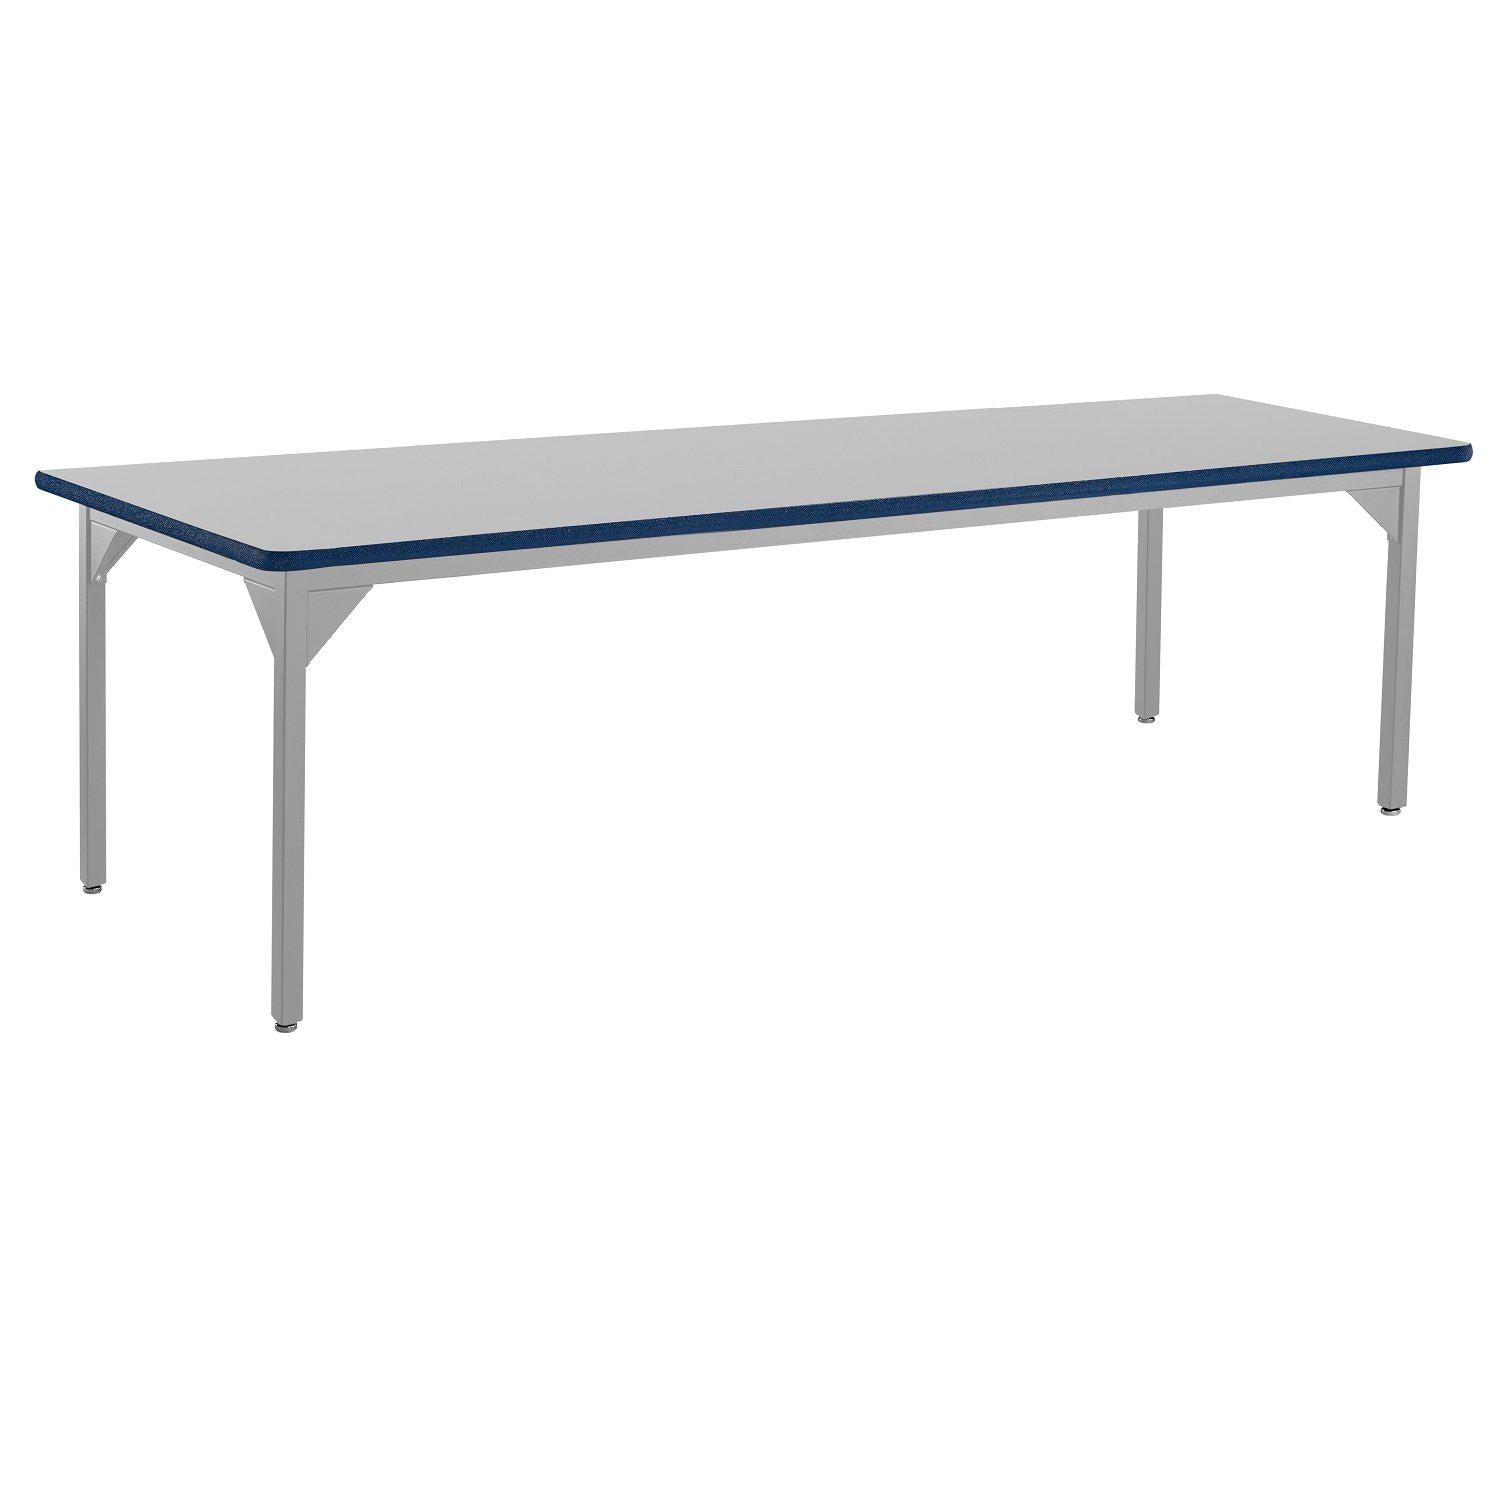 Heavy-Duty Fixed Height Utility Table, Soft Grey Frame, 36" x 72", Supreme High-Pressure Laminate Top with Black ProtectEdge